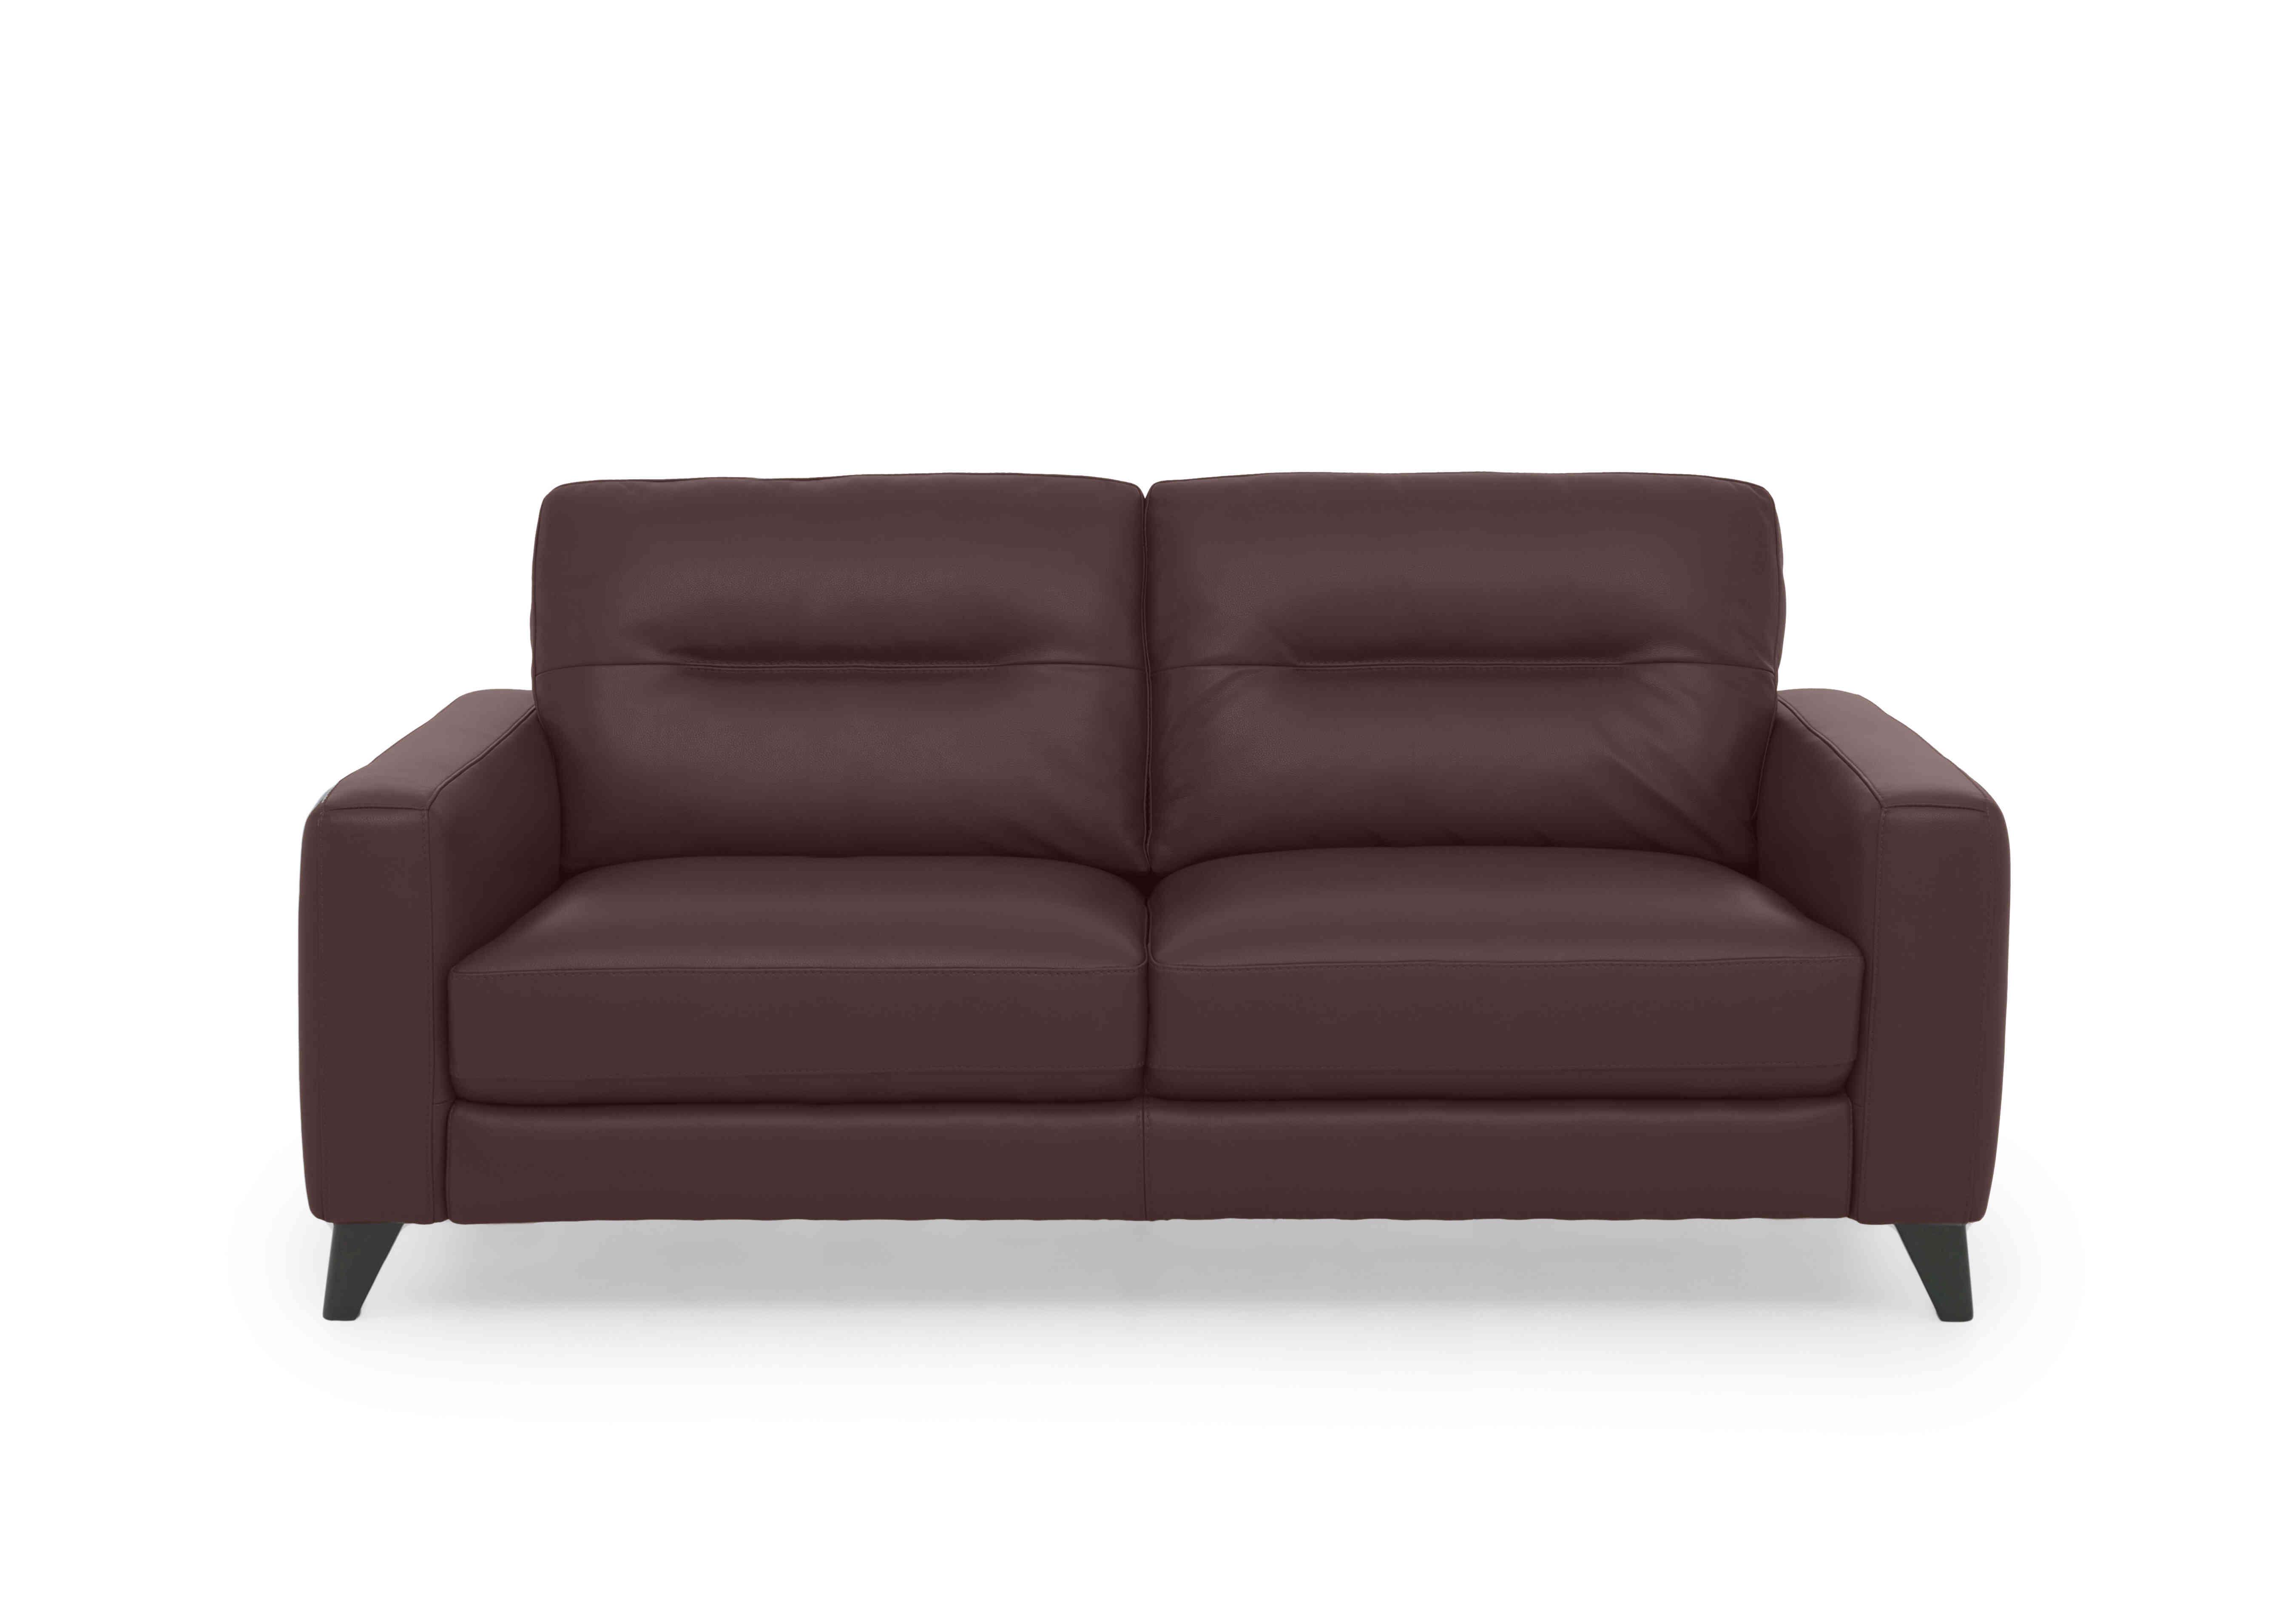 Jules 3 Seater Leather Sofa in An-751b Burgundy on Furniture Village